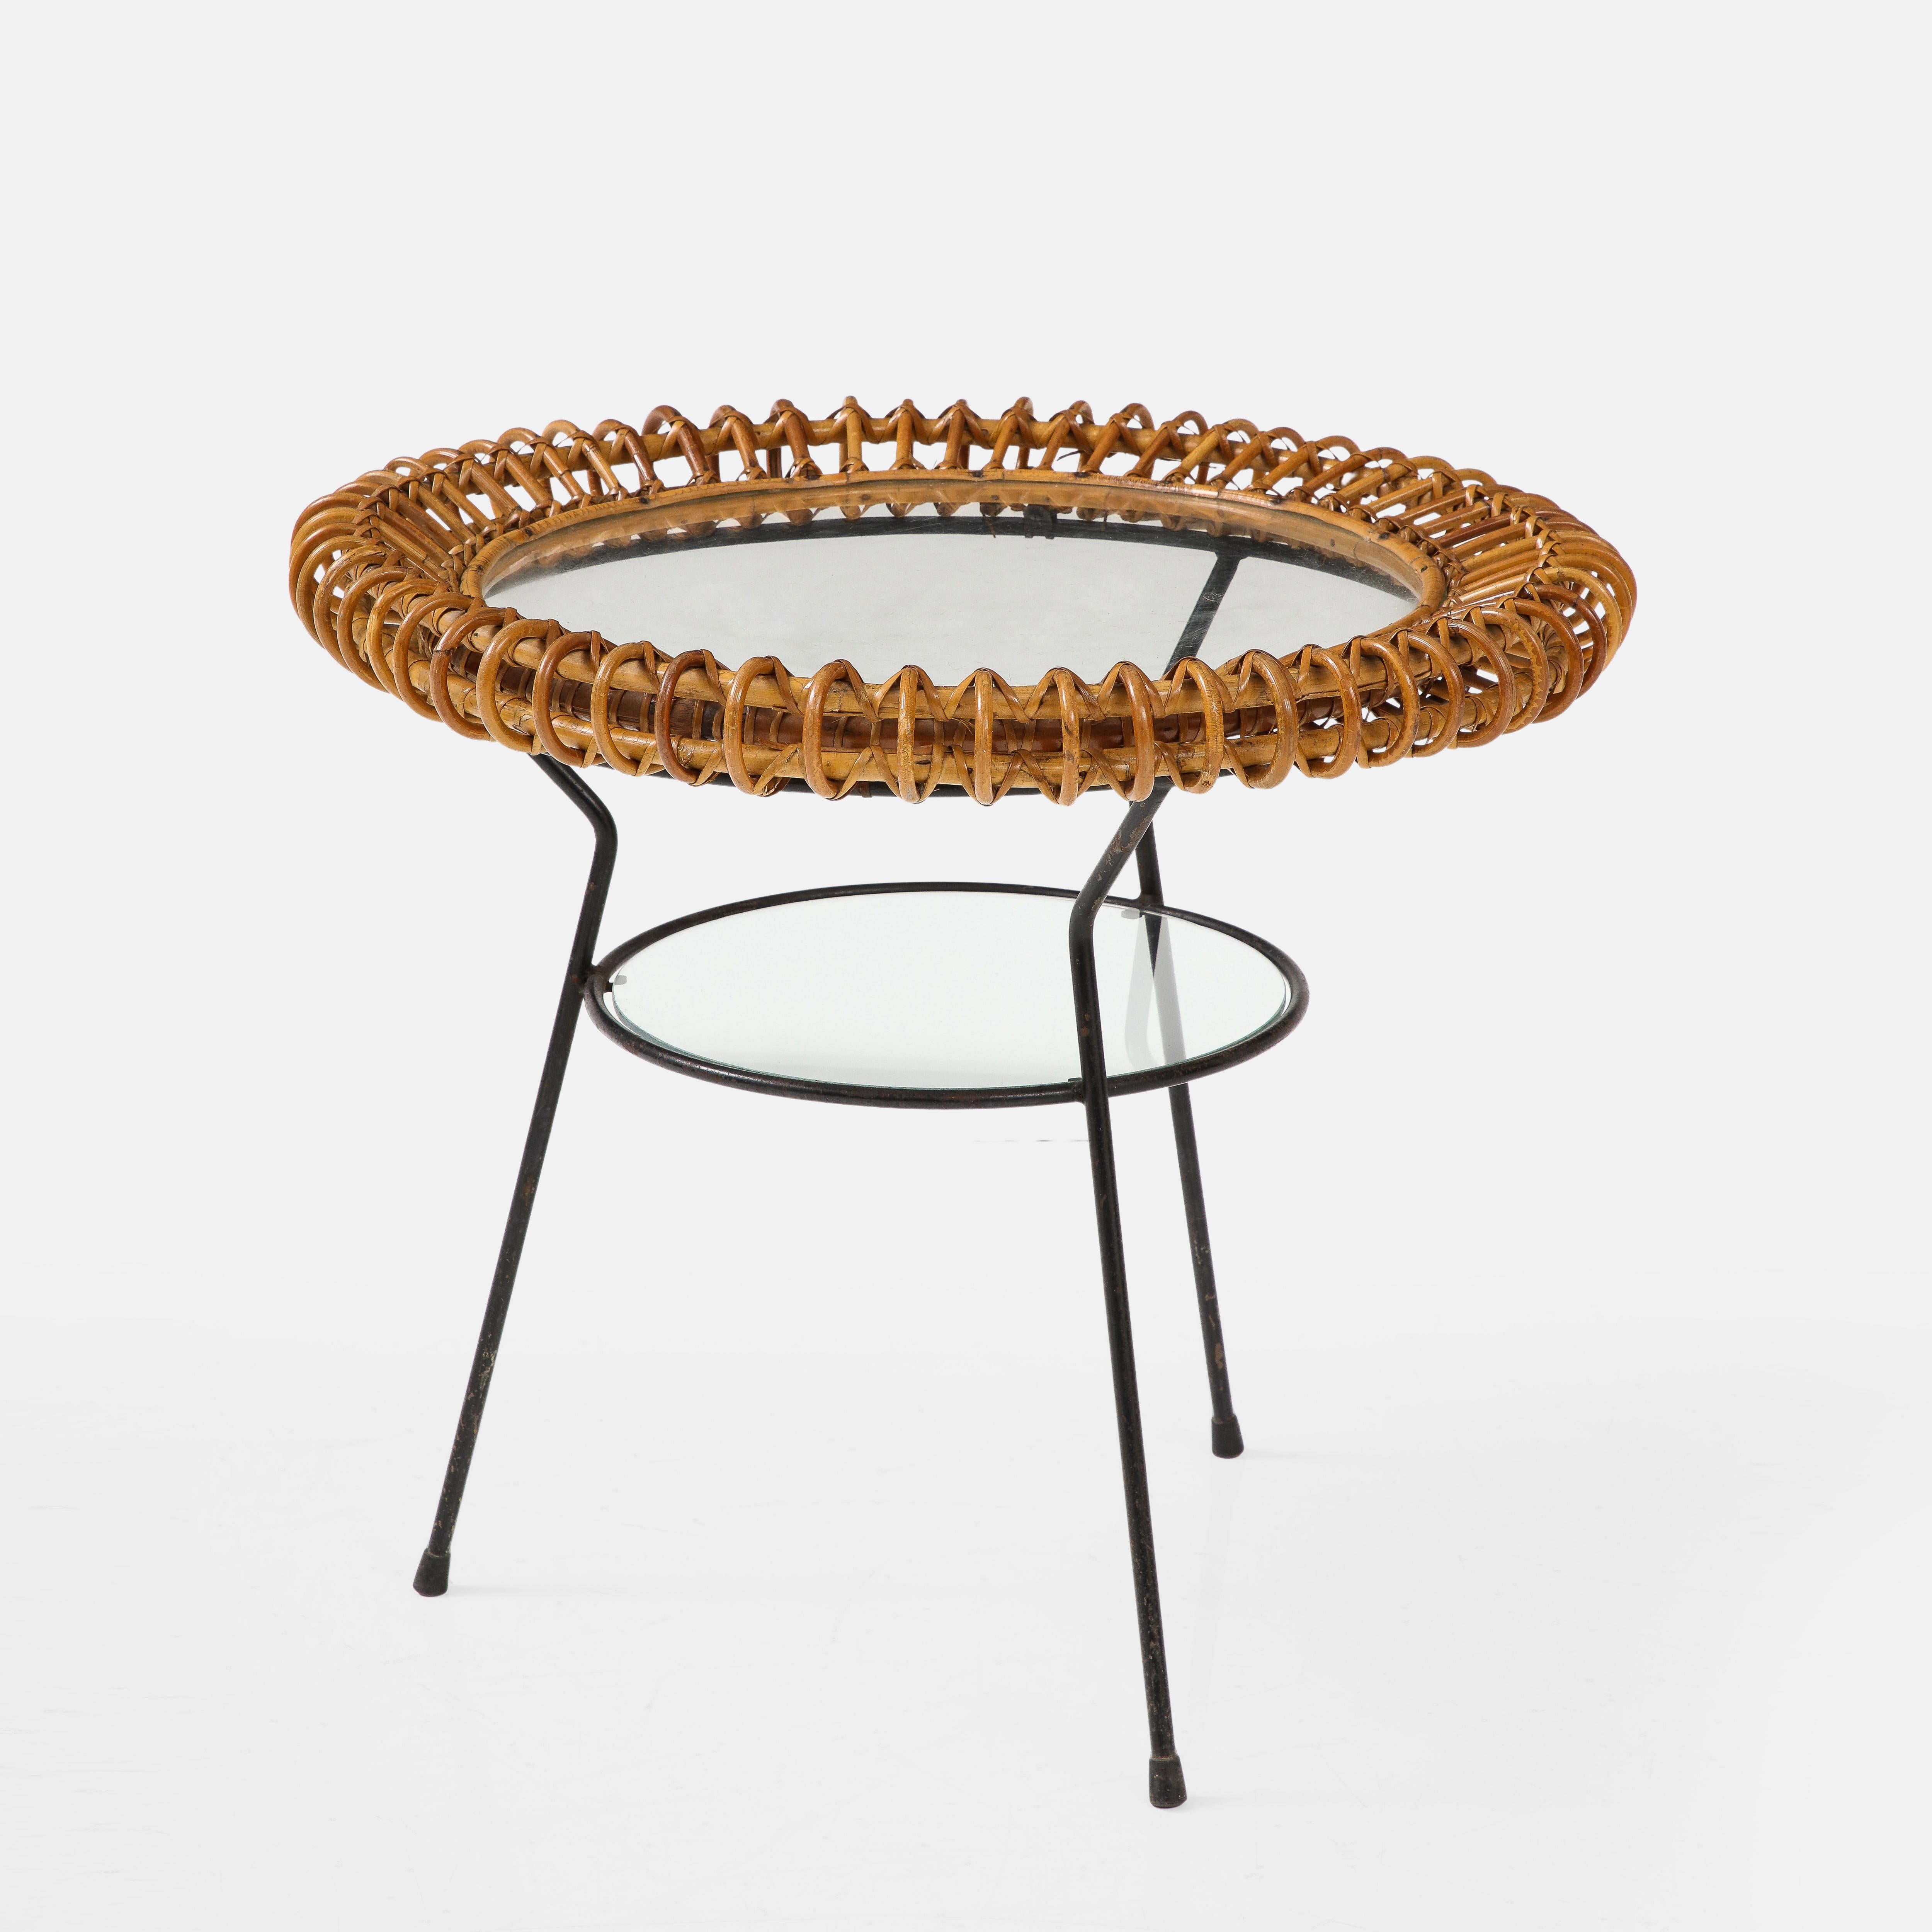 Bonacina round two-tier glass side table with woven bamboo and rattan surrounding a glass top on first tier, and round glass top on second tier all framed in black enameled metal frame. This chic Mid-Century Modern table has a beautifully woven and